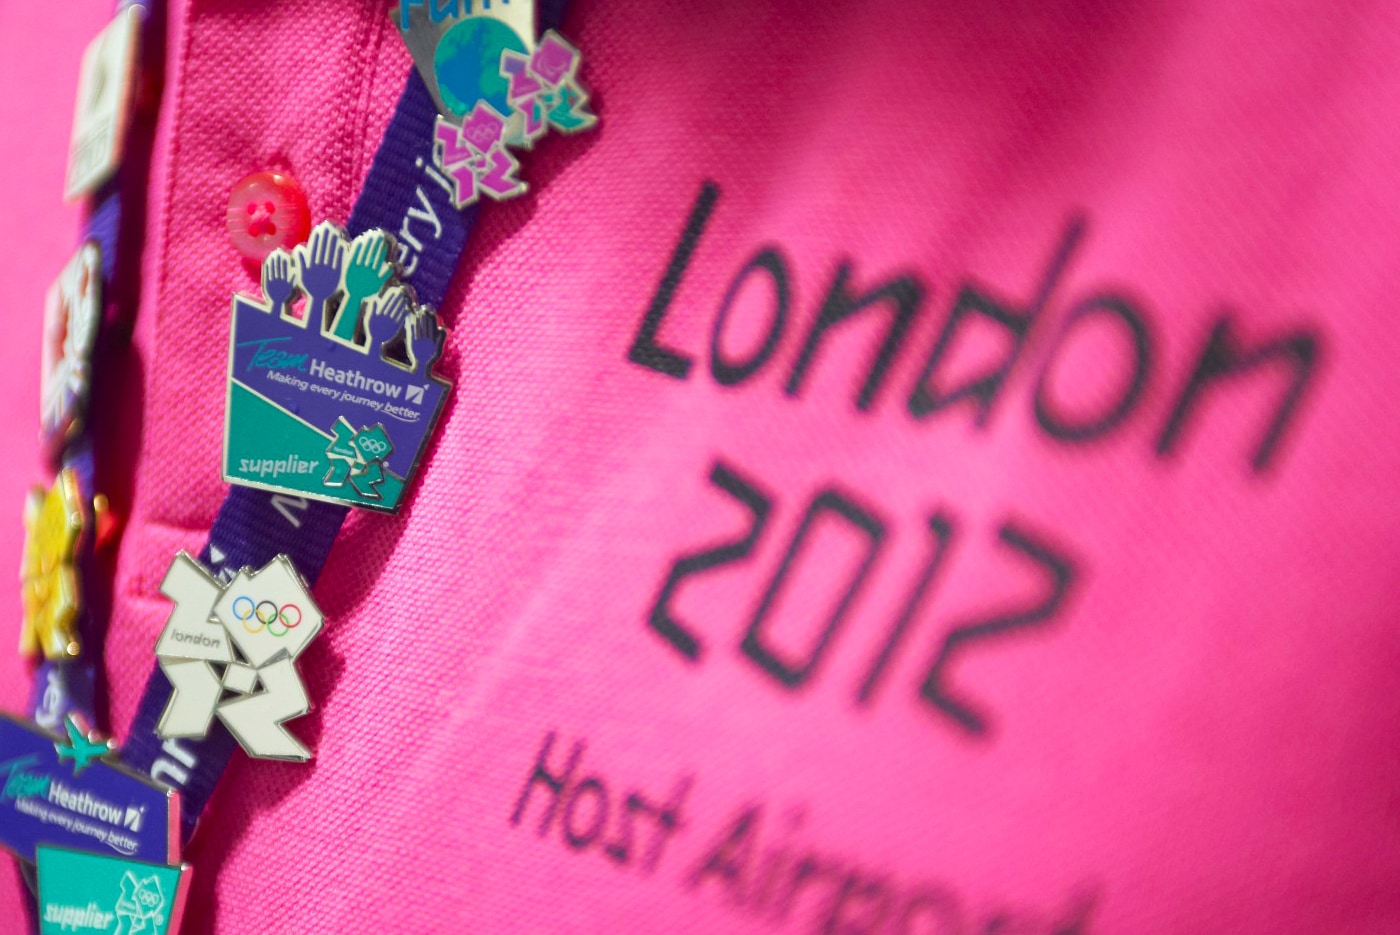 London 2012 - Heathrow and the Games